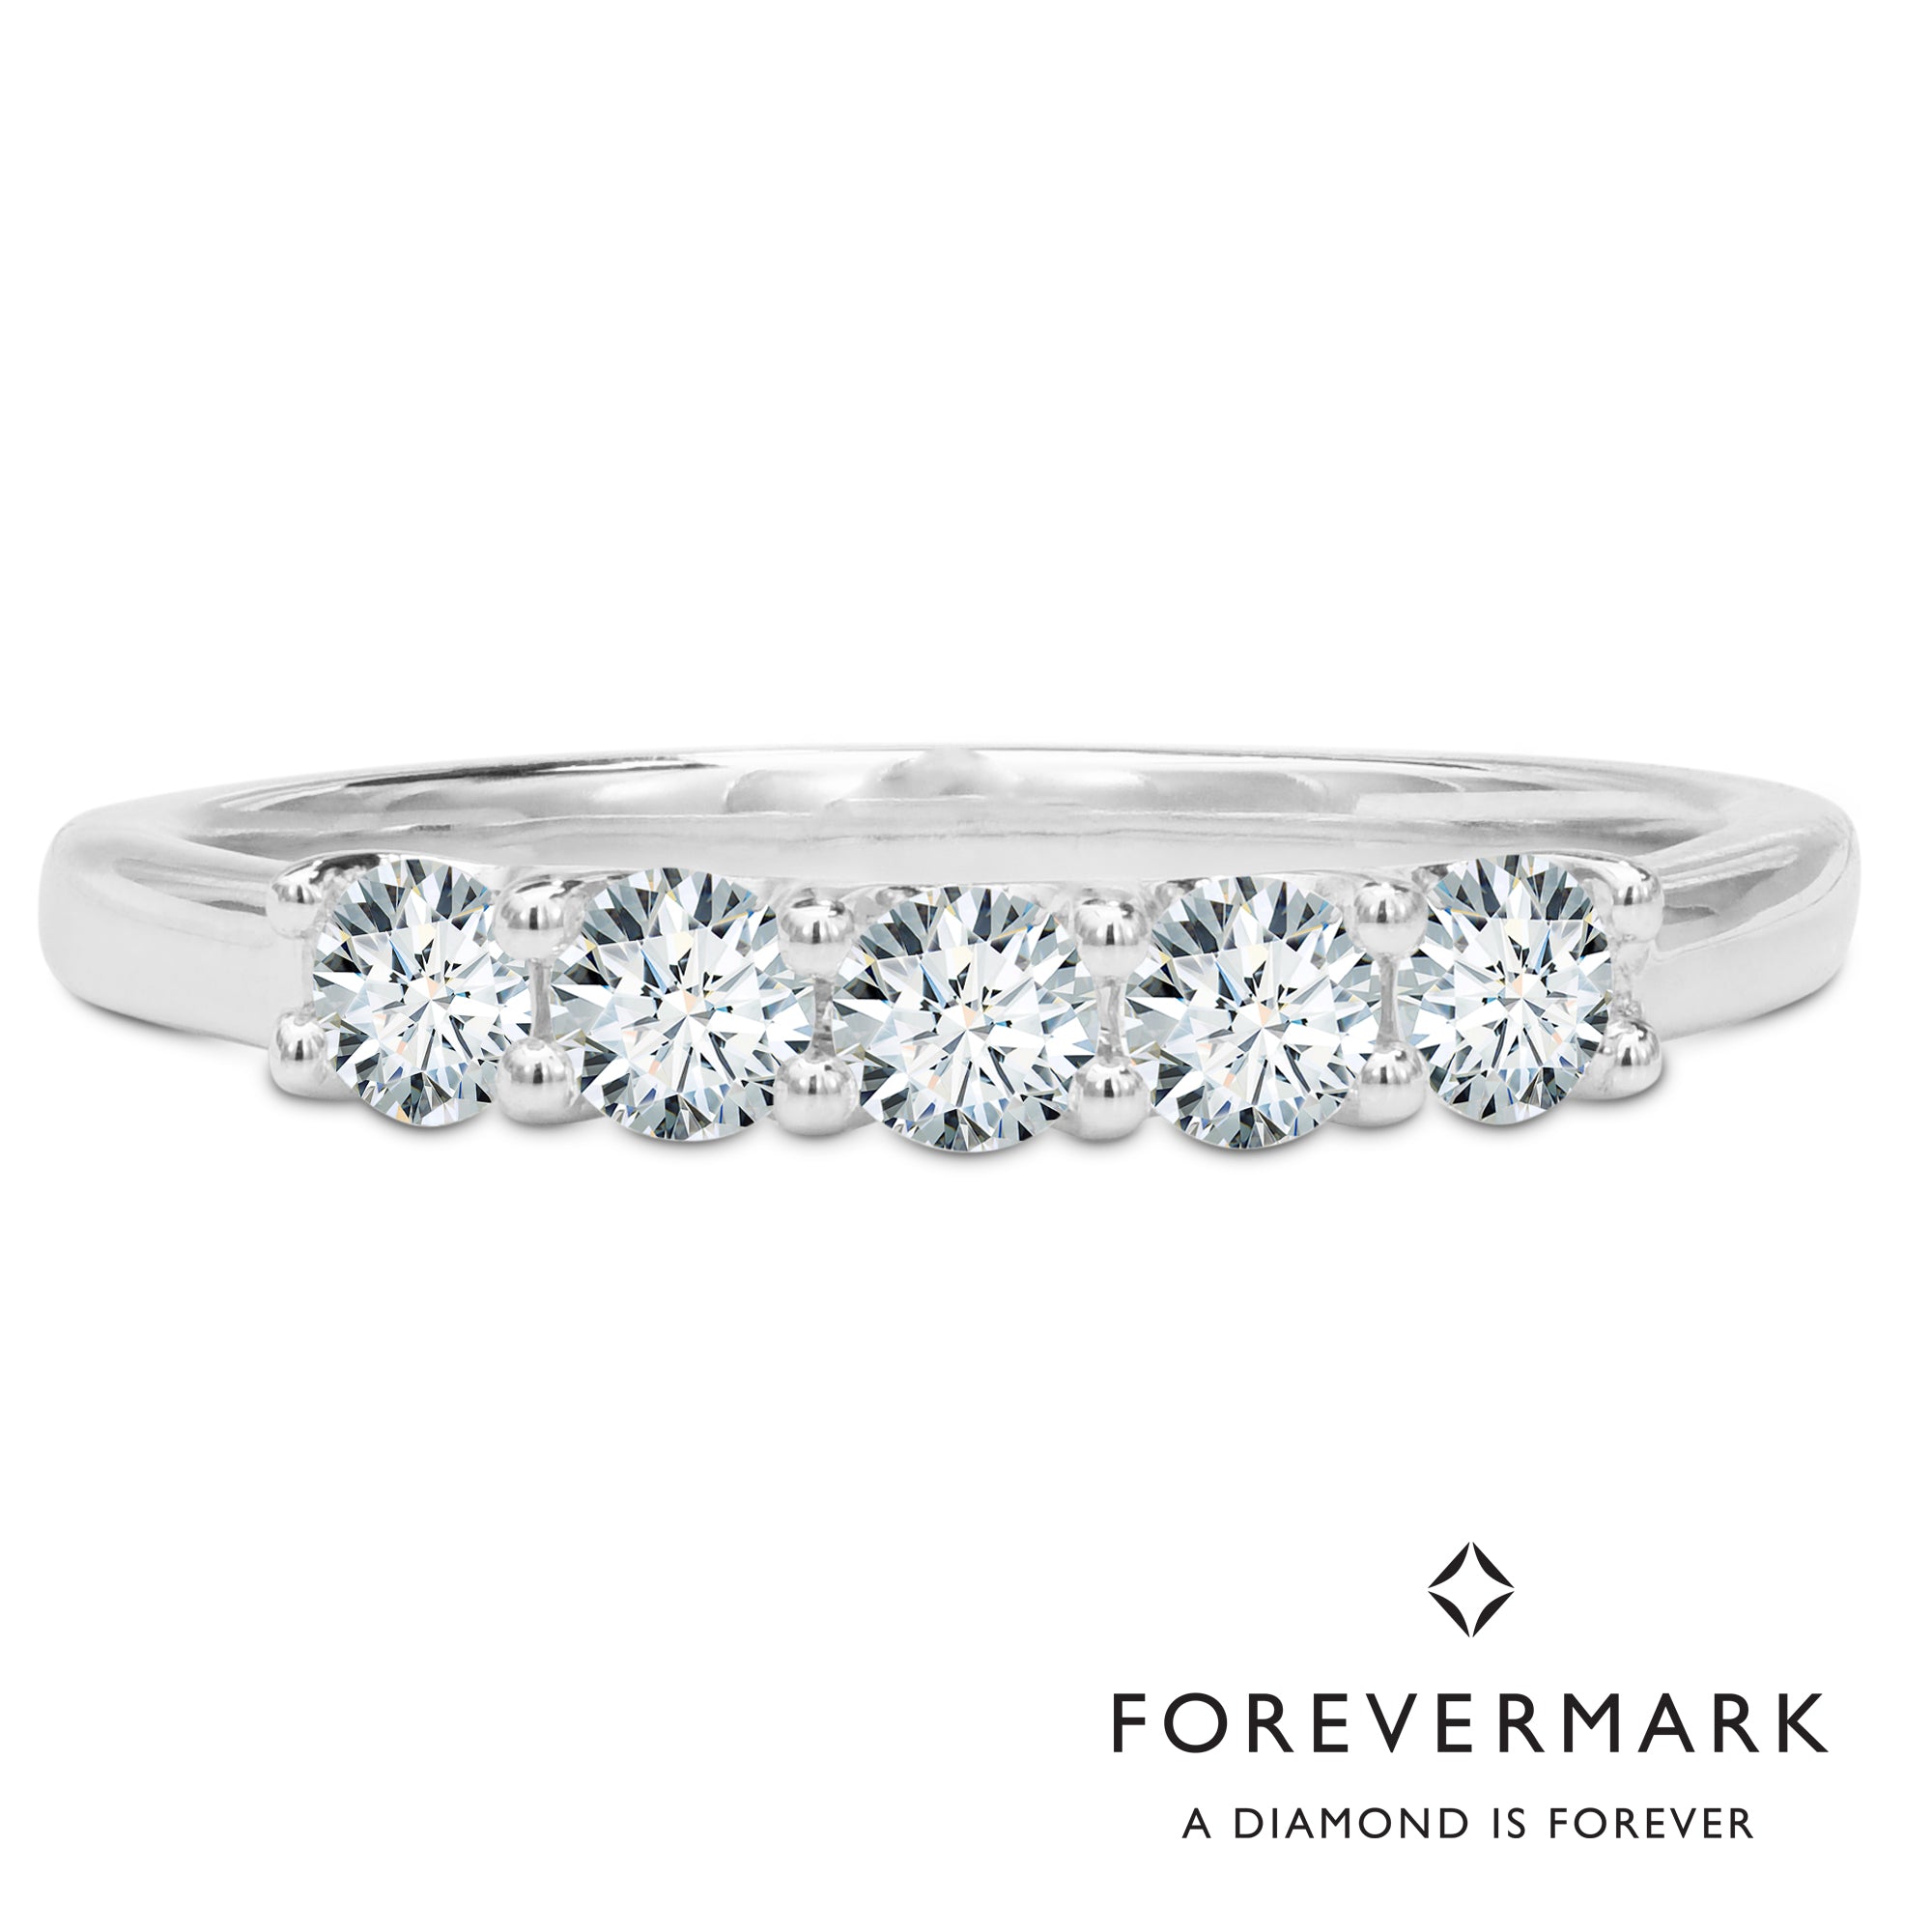 De Beers Forevermark Diamond Wedding Band in 18kt White Gold (1/2ct tw)